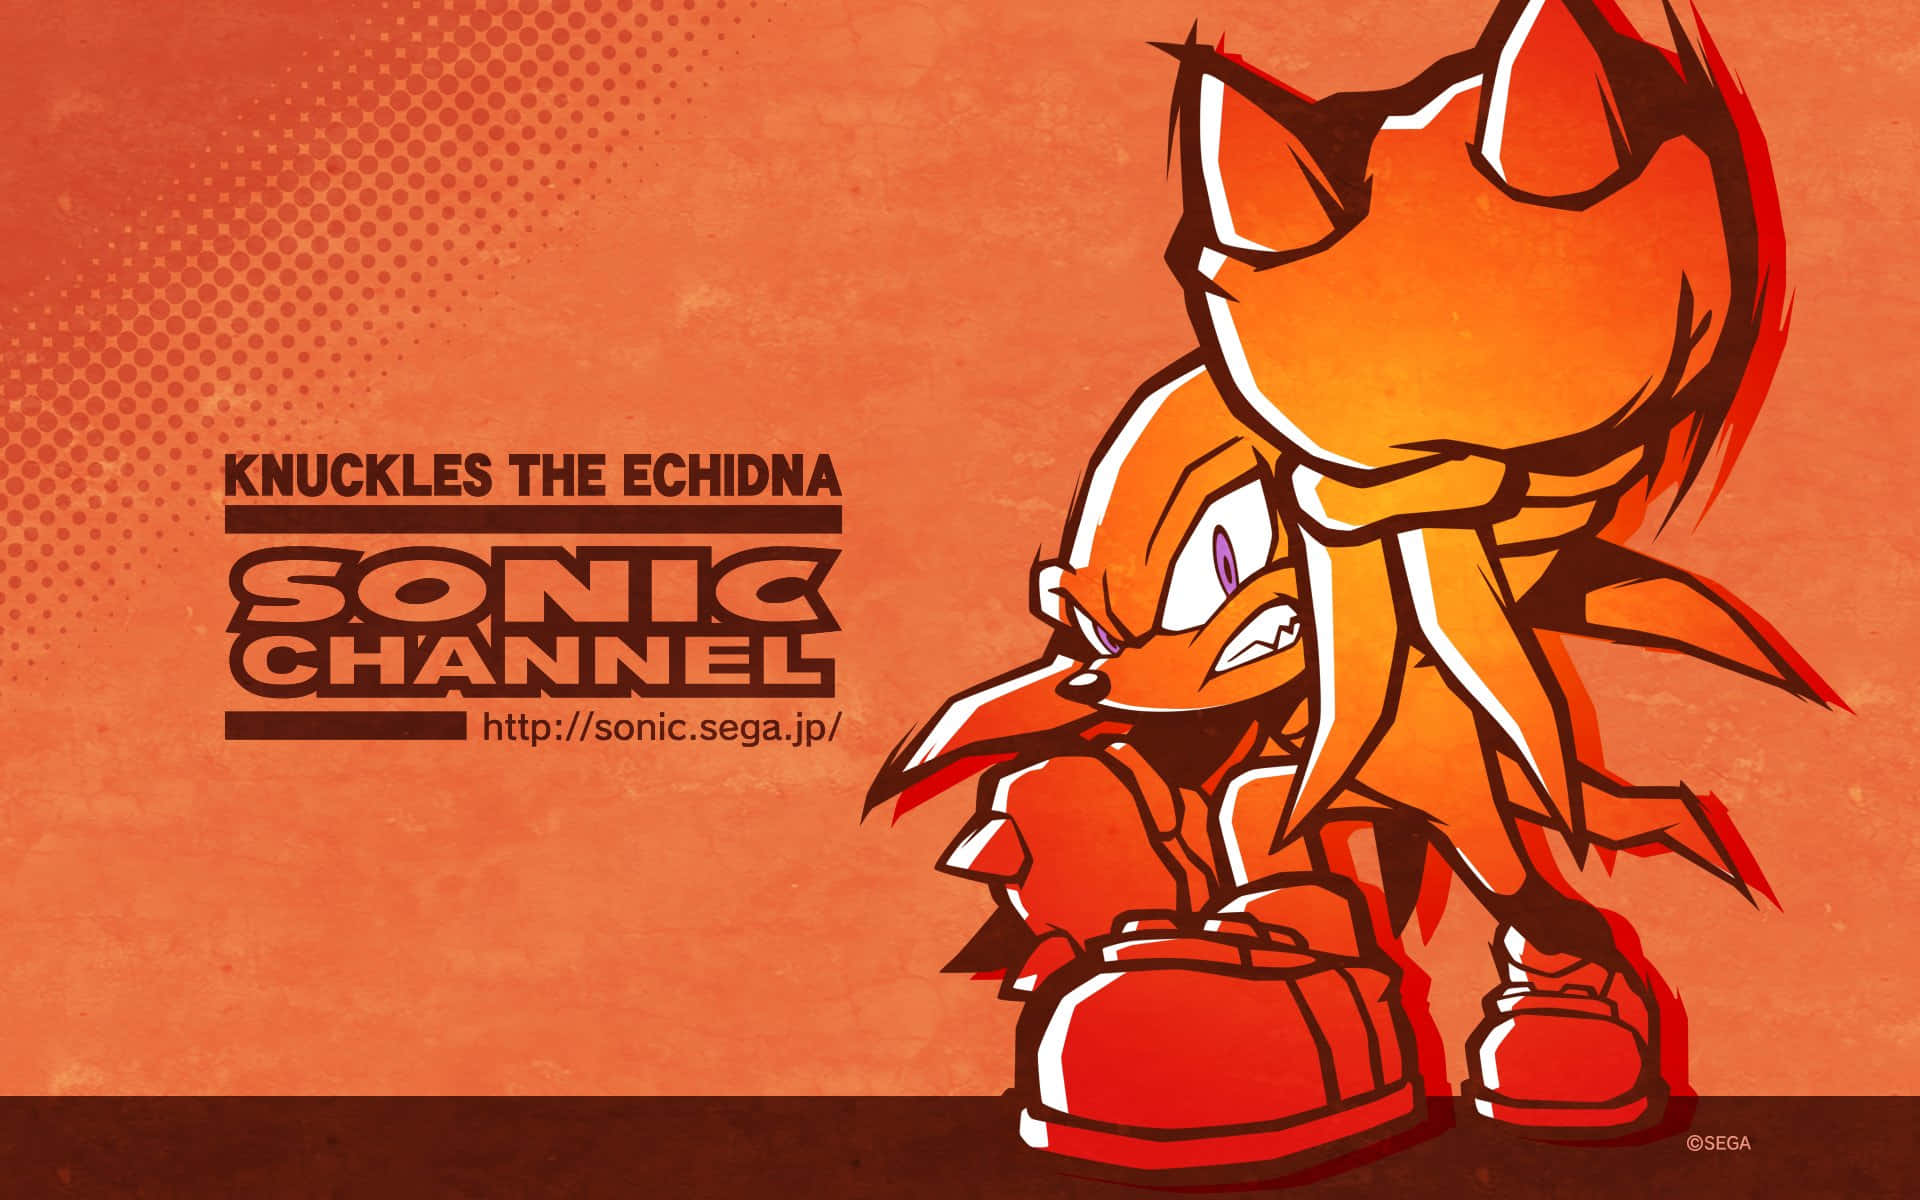 Knuckles The Echidna From Sonic The Hedgehog Wallpaper